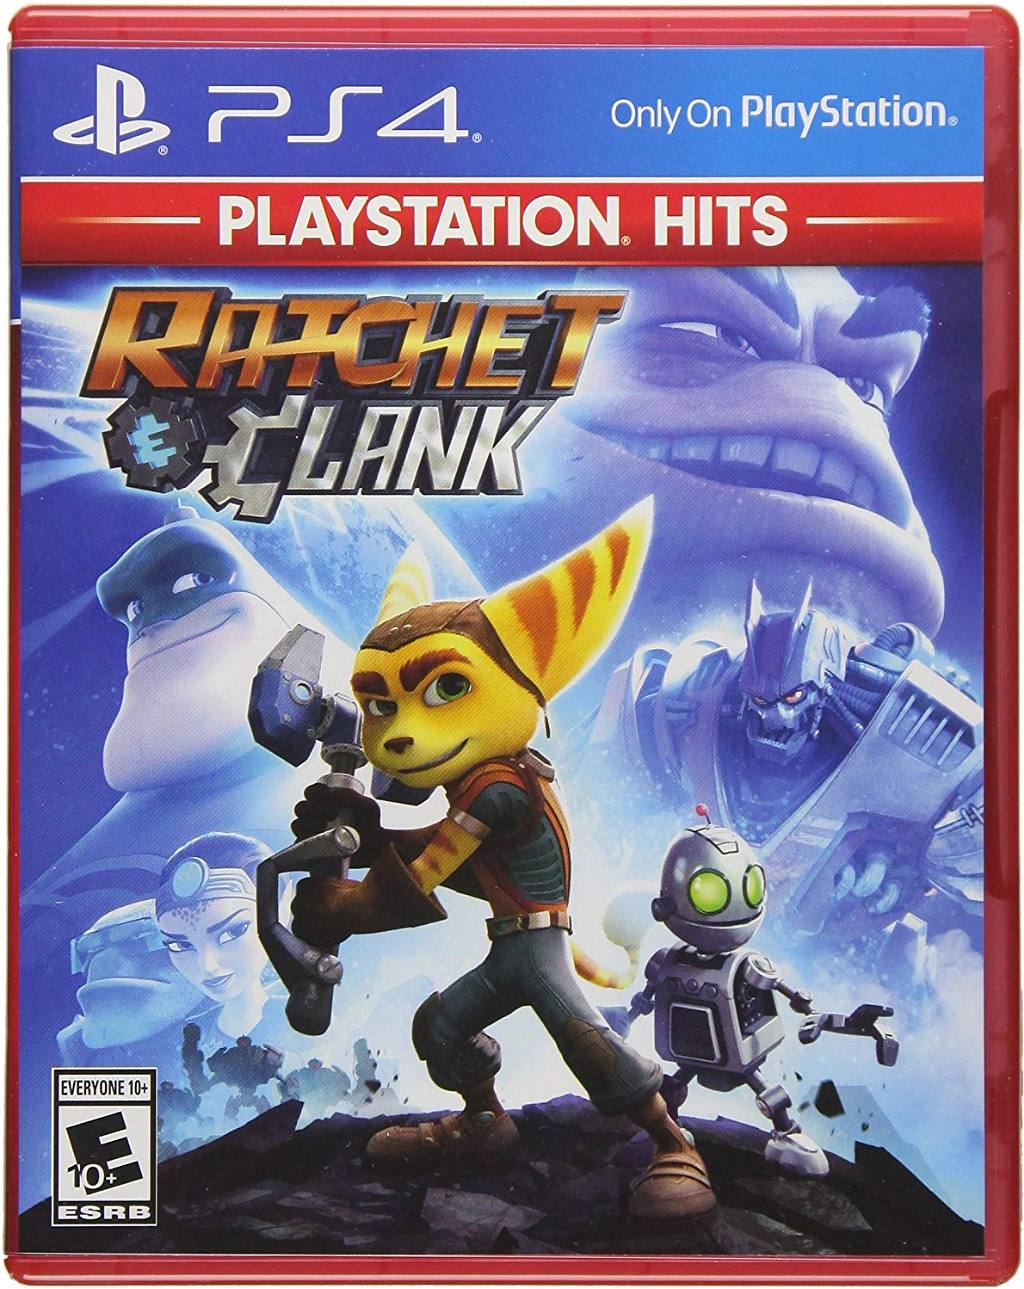 Ratchet & Clank (PlayStation Hits) for PlayStation